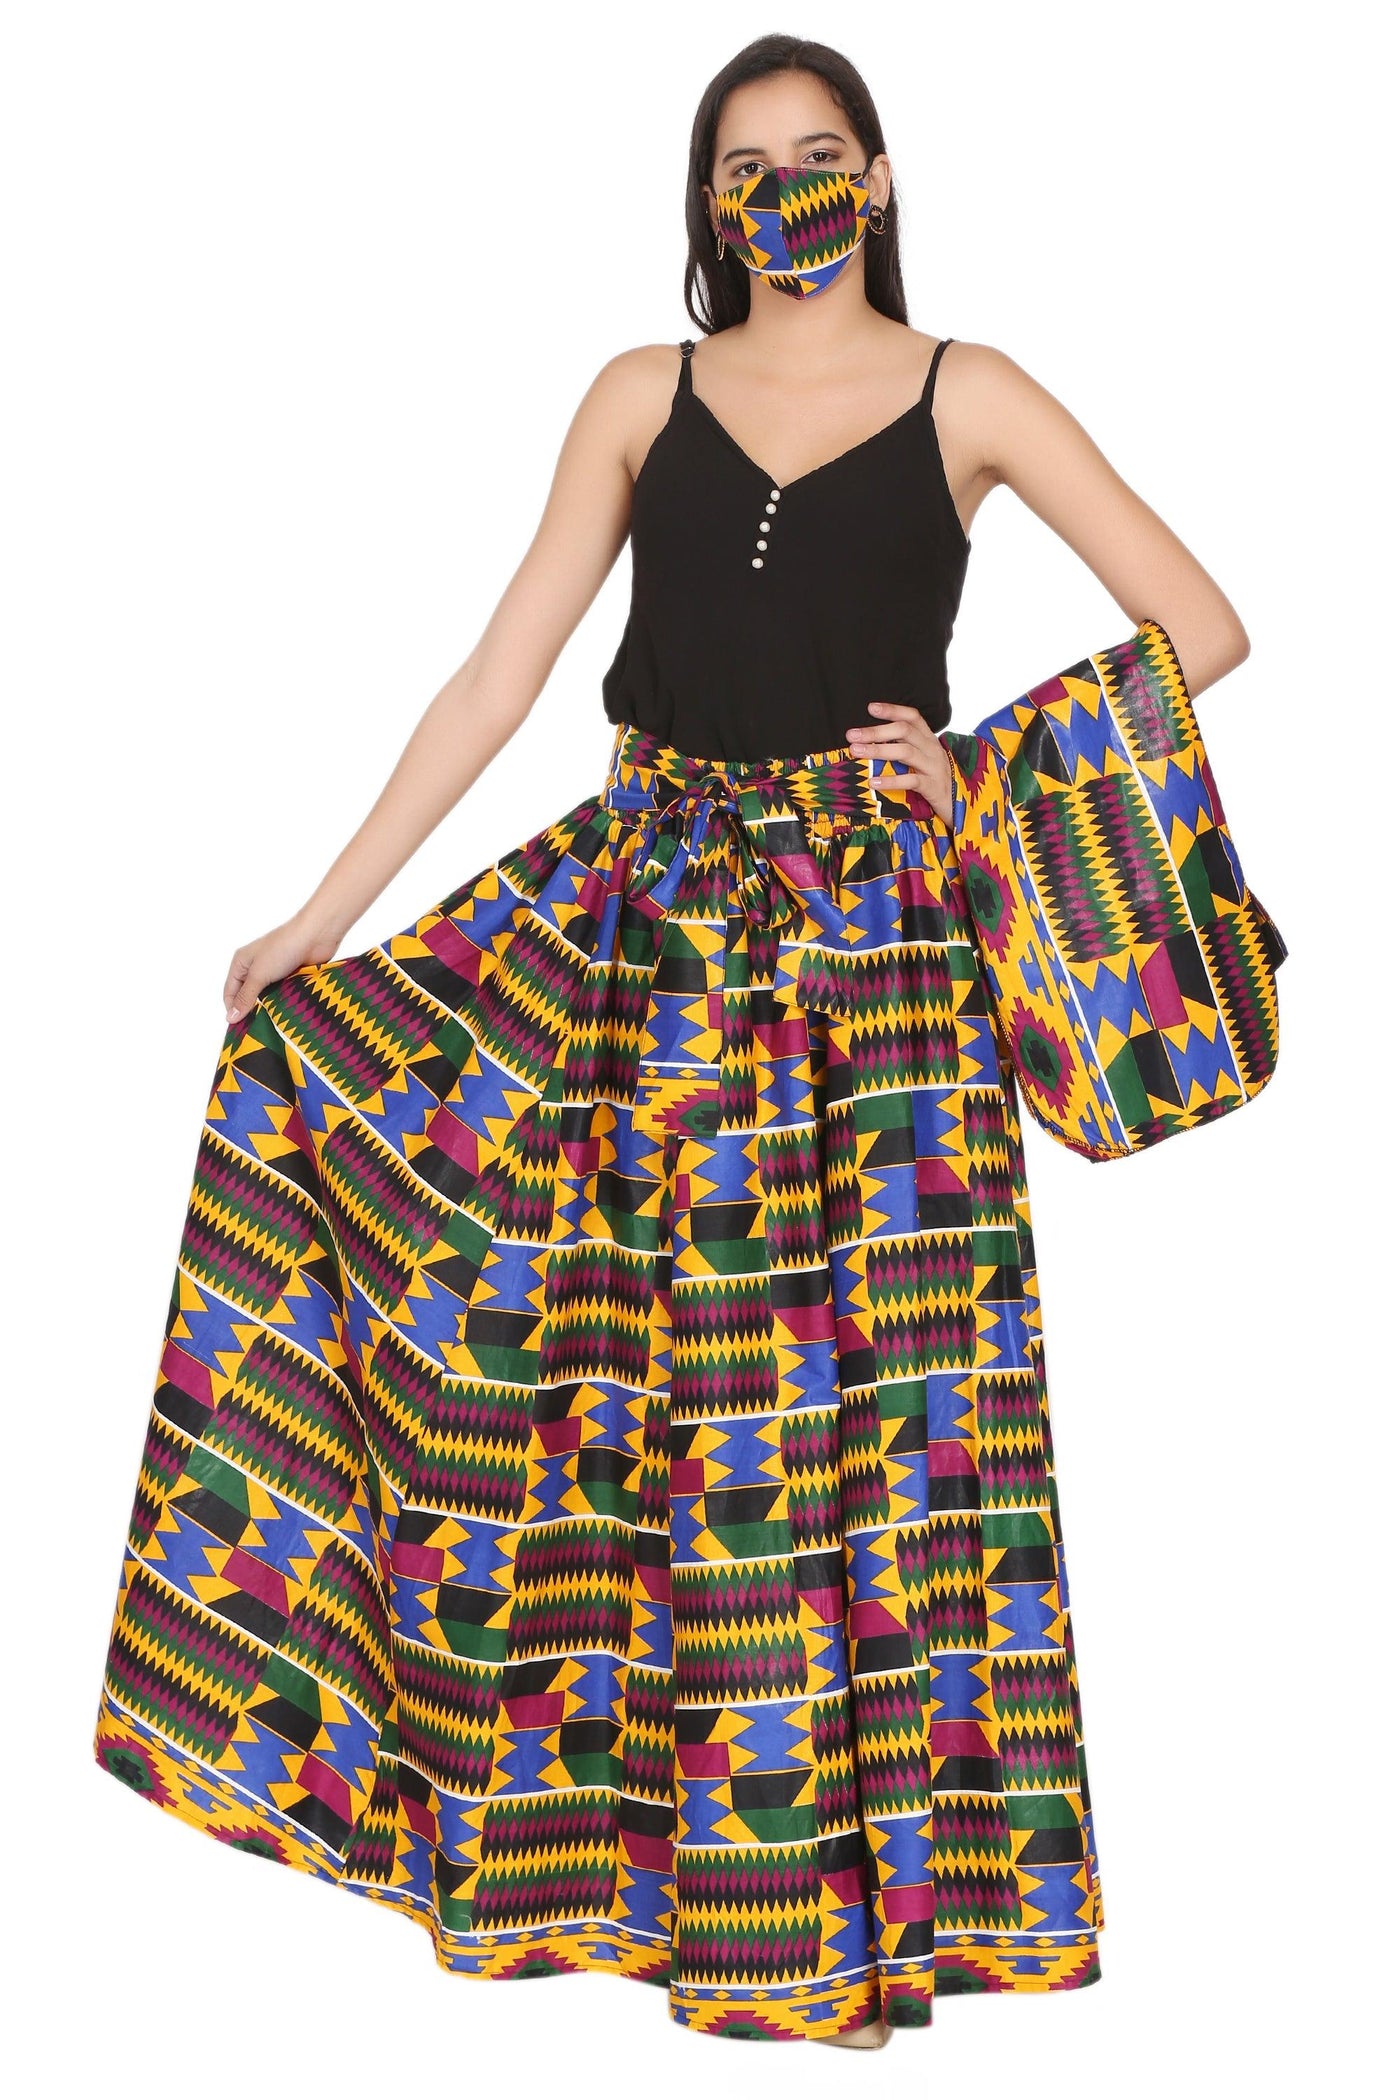 African Print Wax Print Skirt One Size Fits Most Headwrap Included Elastic Waist Pockets 16317-616